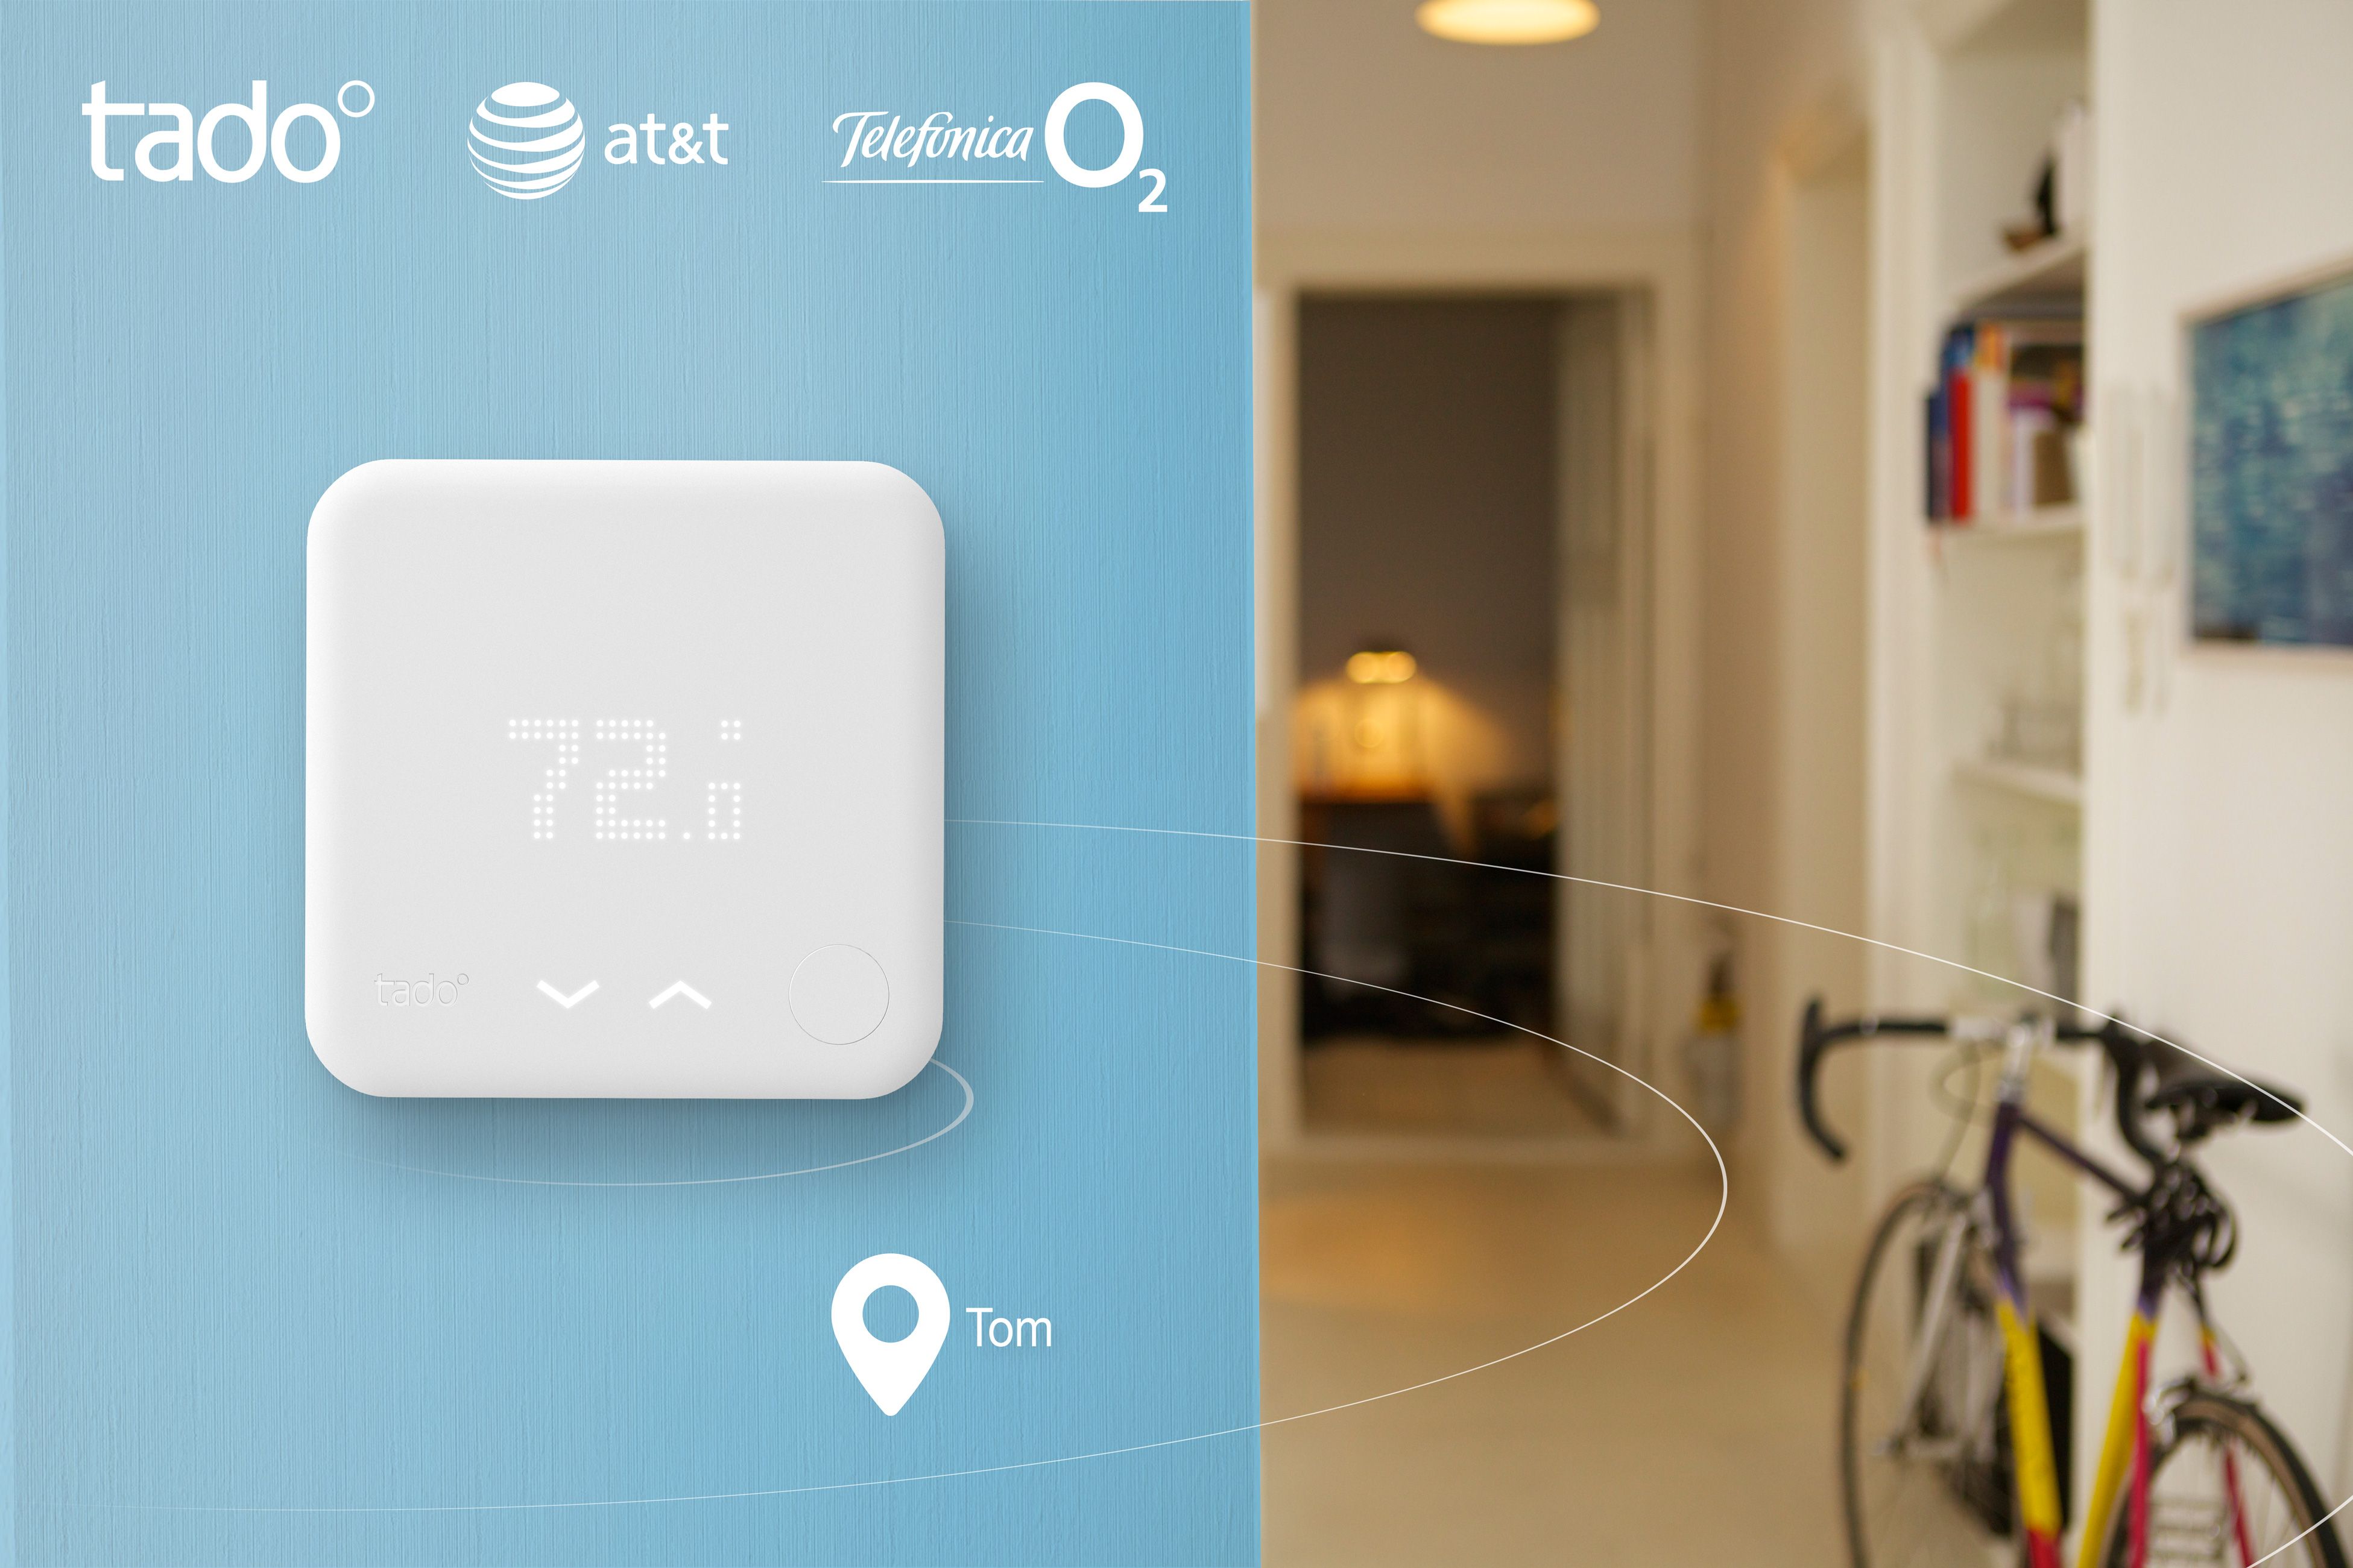 tado teams up with at t and o2 to add new features like turning on lights image 1